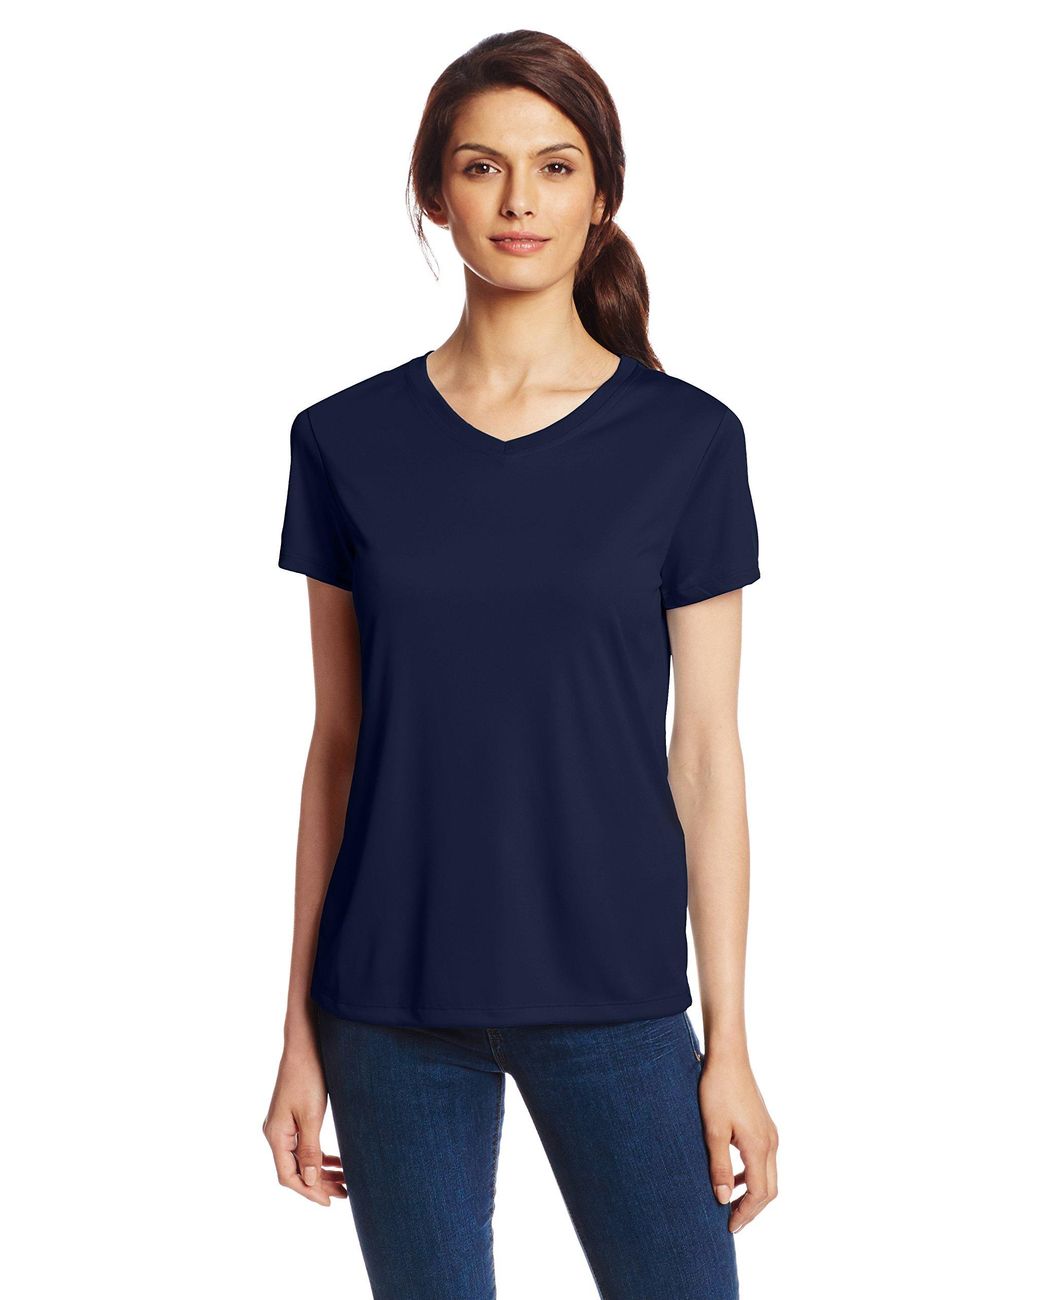 Hanes Synthetic Sport Cool Dri Performance V-neck Tee,navy,small in ...